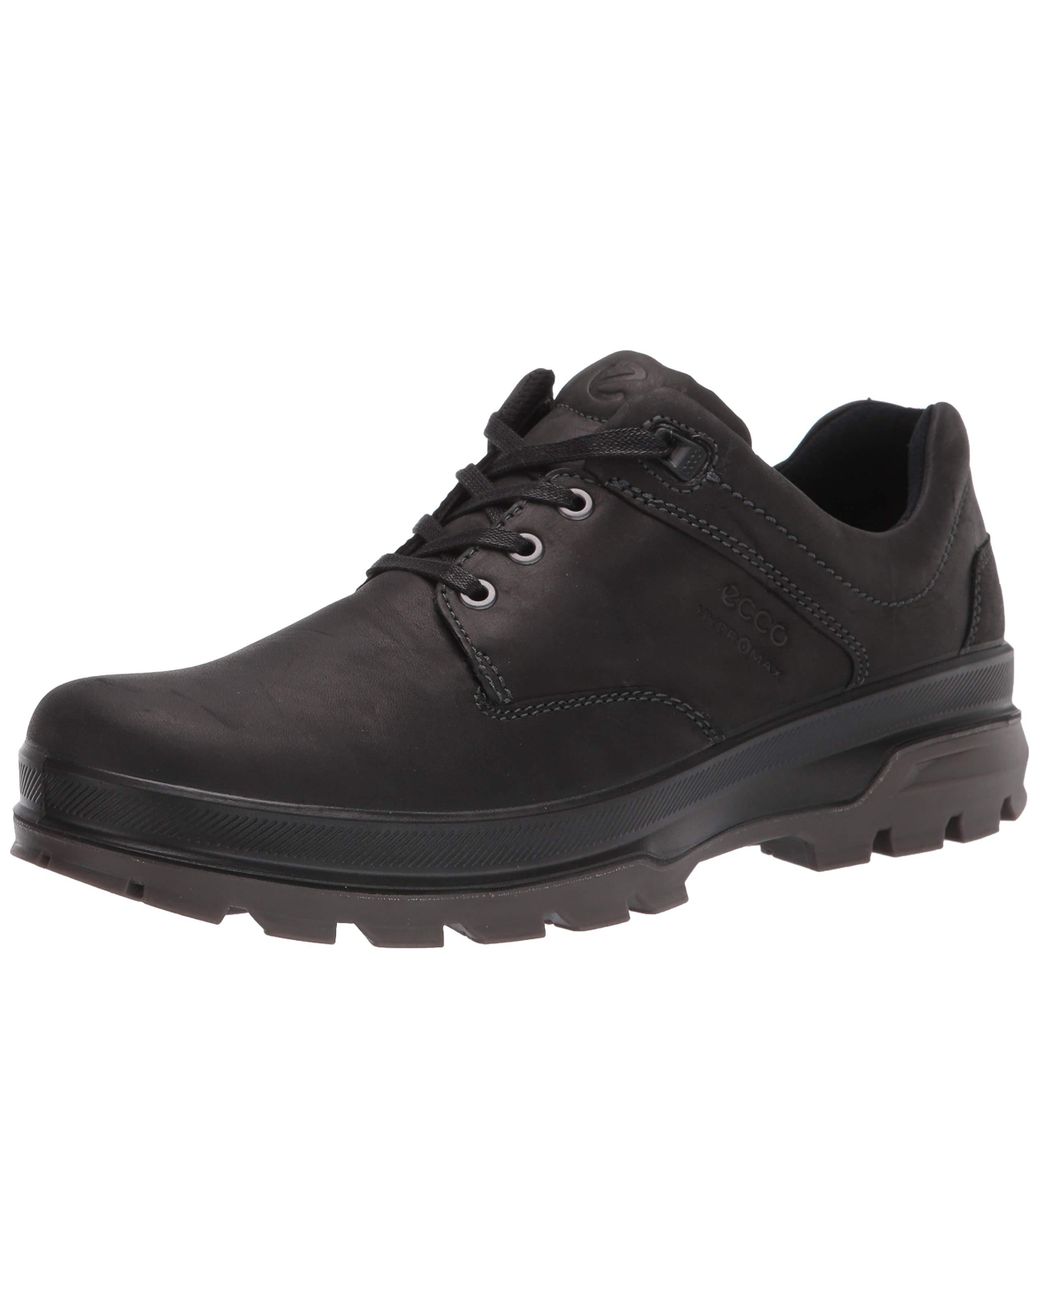 Ecco Leather Rugged Track High Hydromax Hiking Shoe in Black Nubuck (Black)  for Men | Lyst